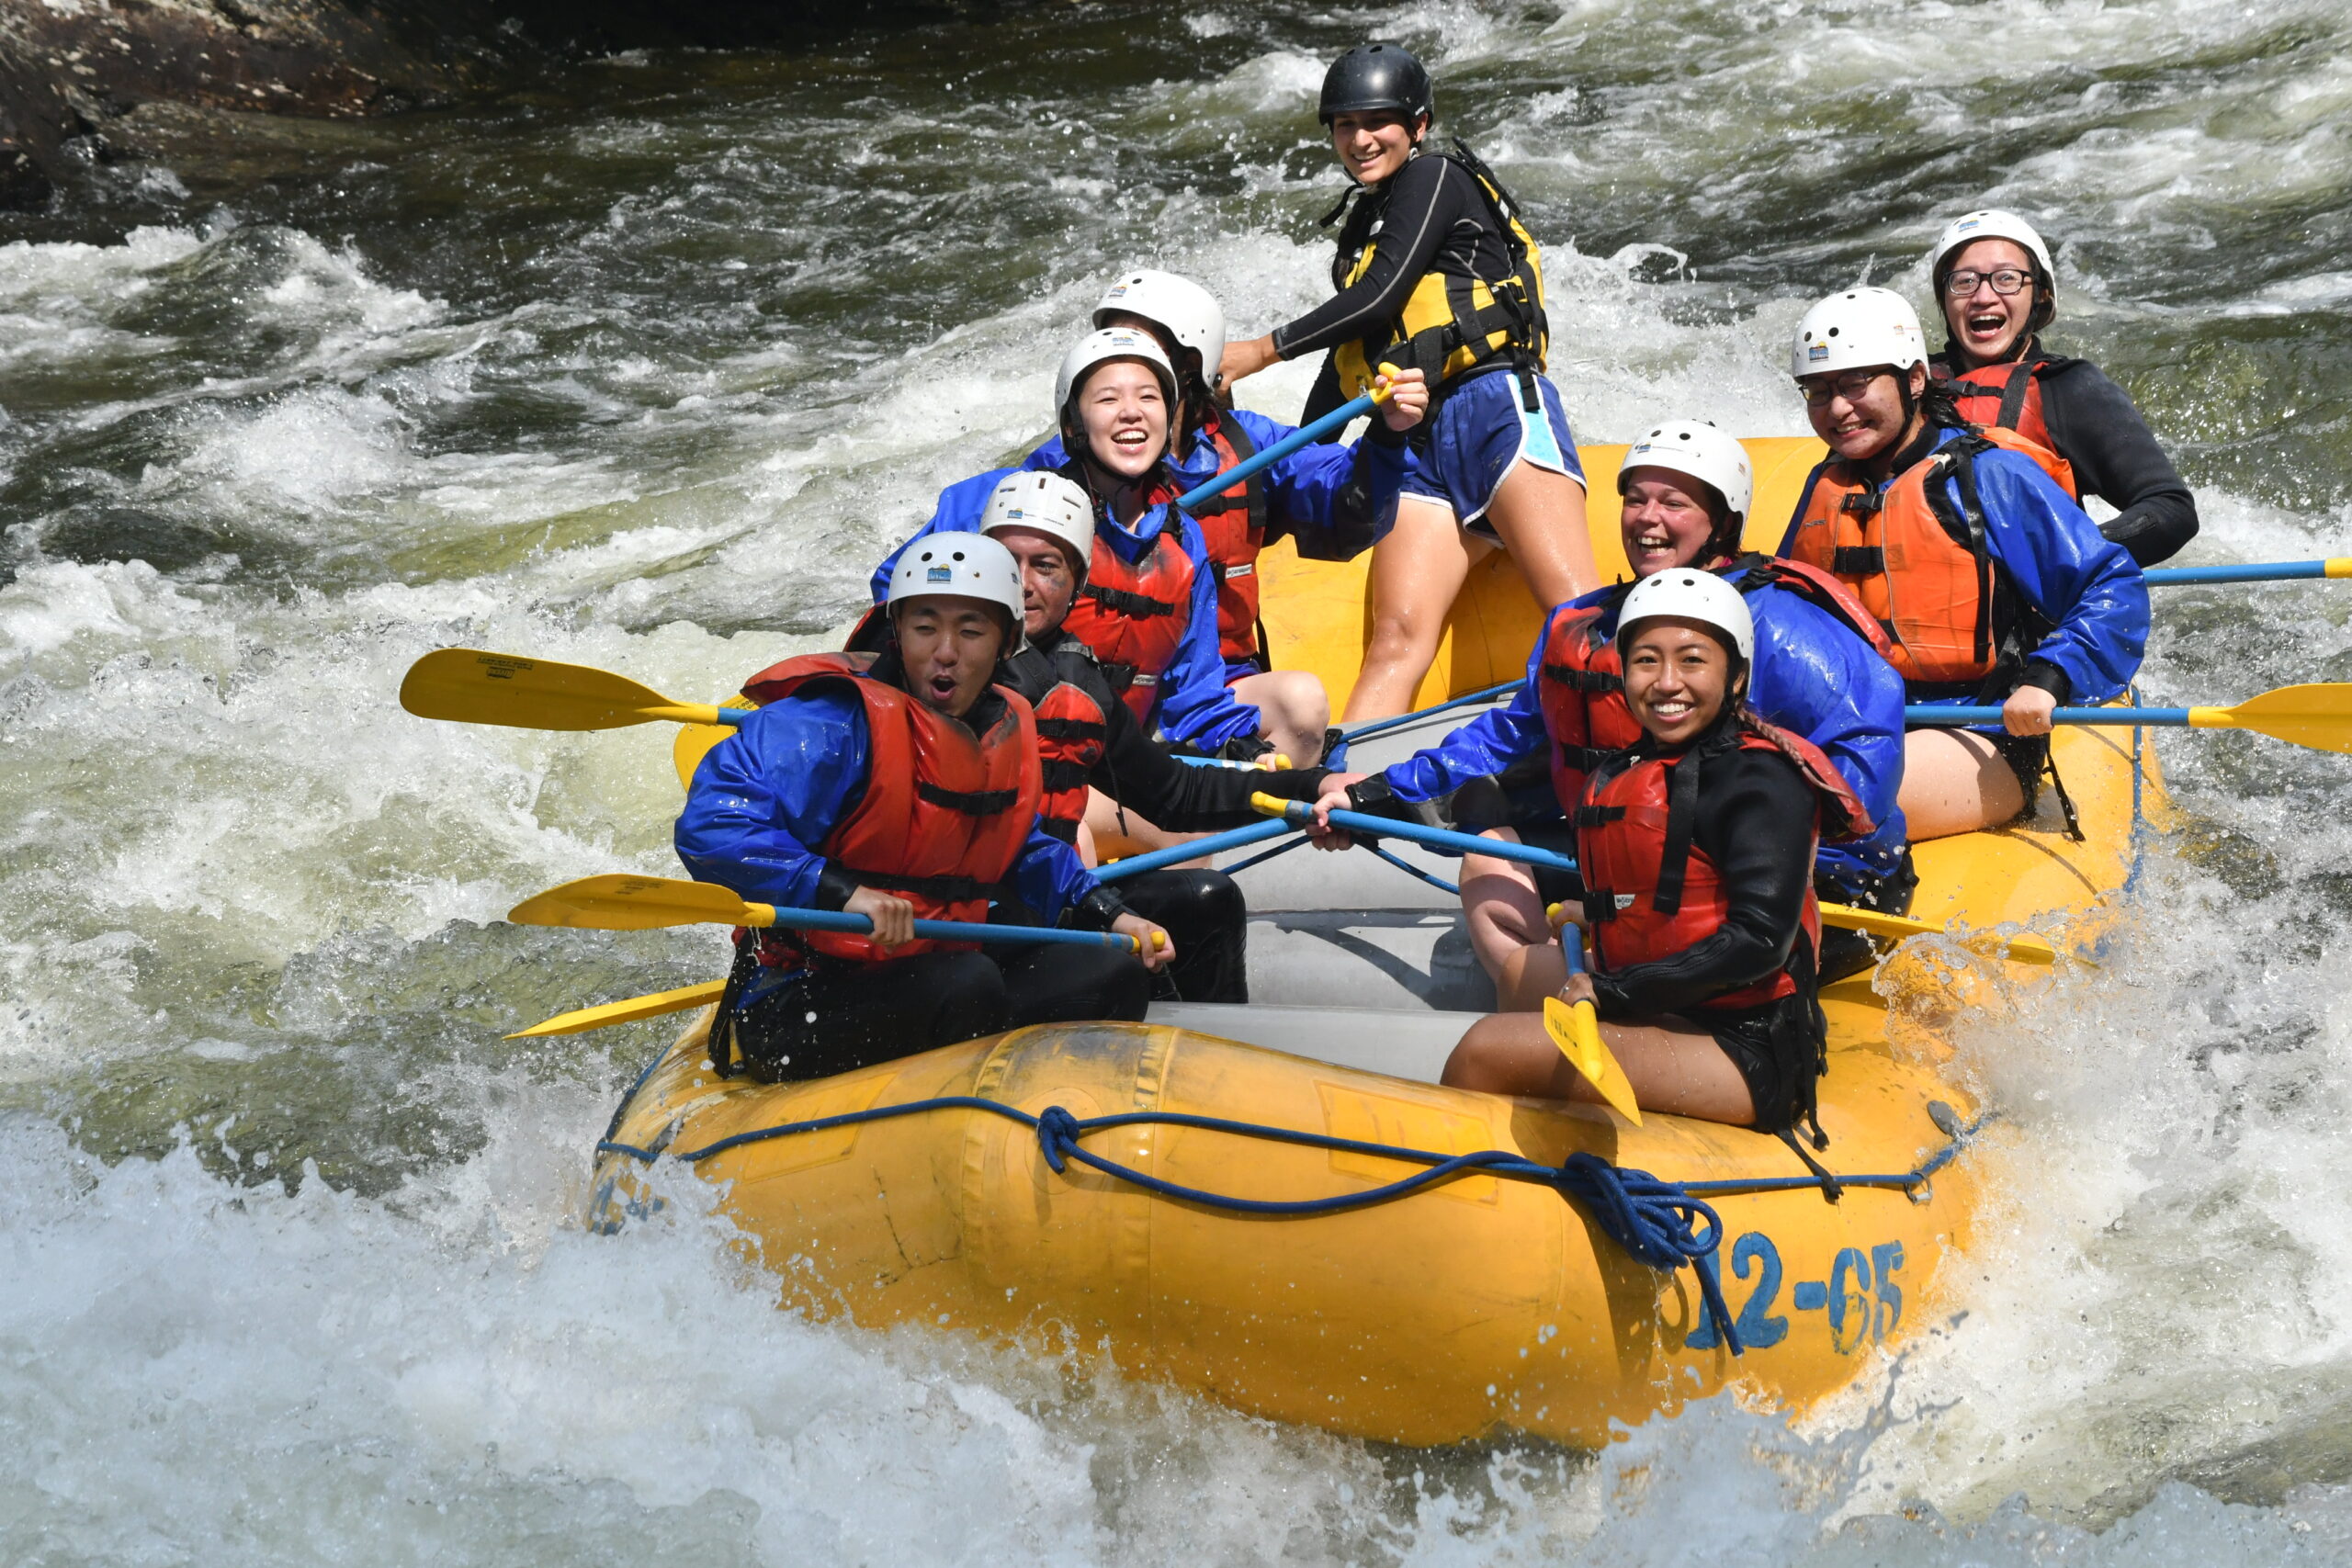 Rafting as Team Building: Why Companies and Youth Groups Are Heading to the Rapids